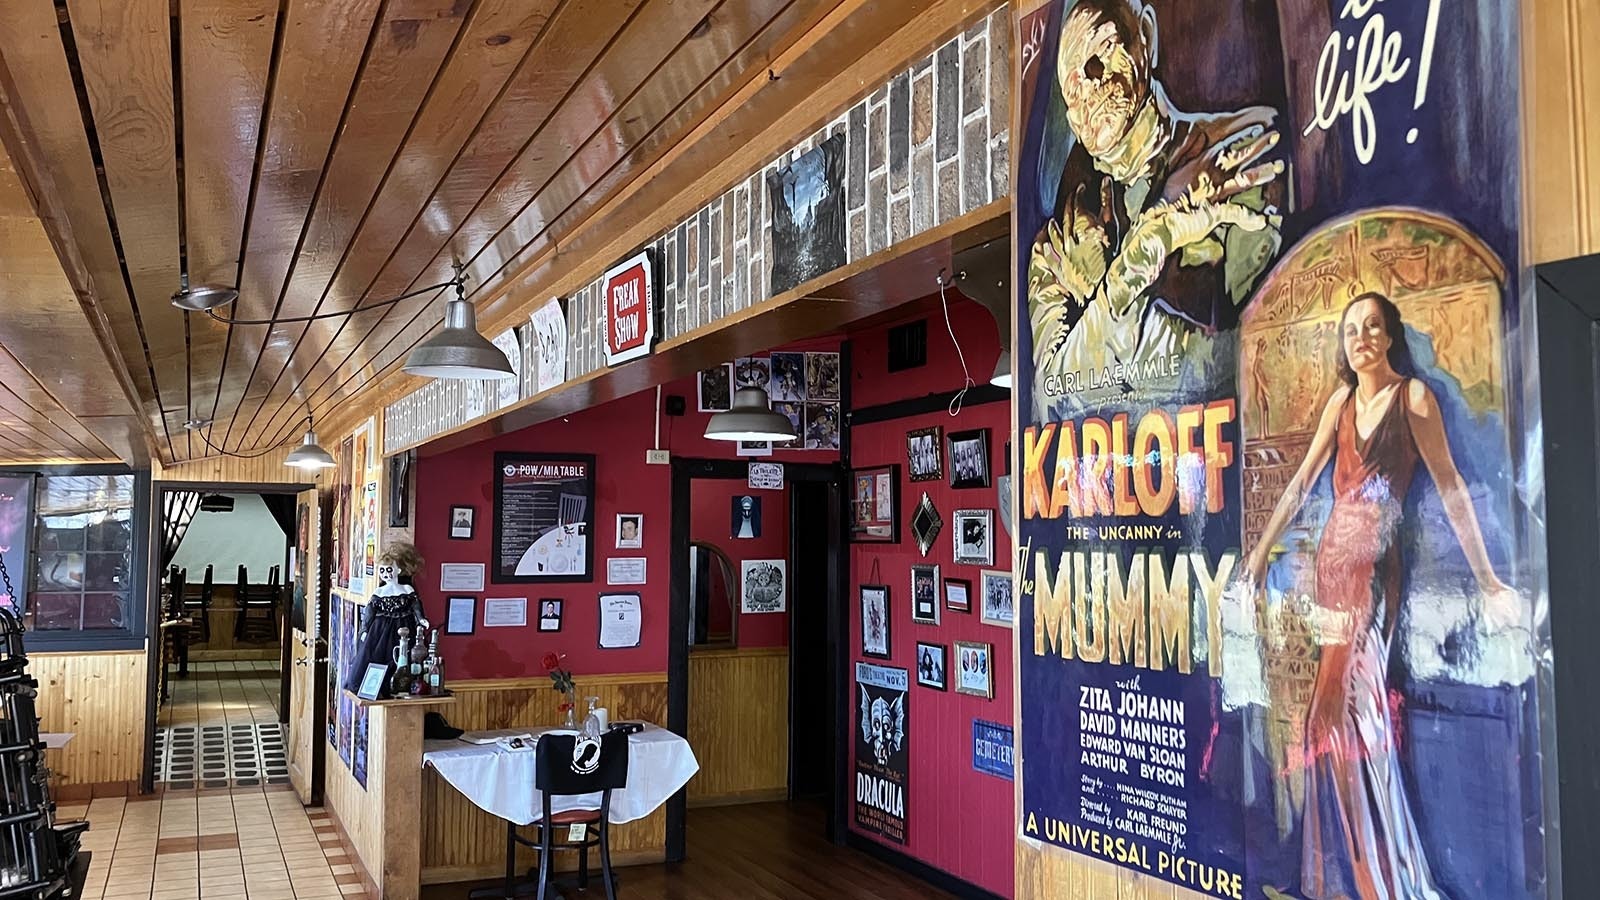 Several movie posters from horror-genre movies decorate the walls at Little Shop of Burgers, including one from this 1932 movie on the “Mummy” starring Boris Karloff.